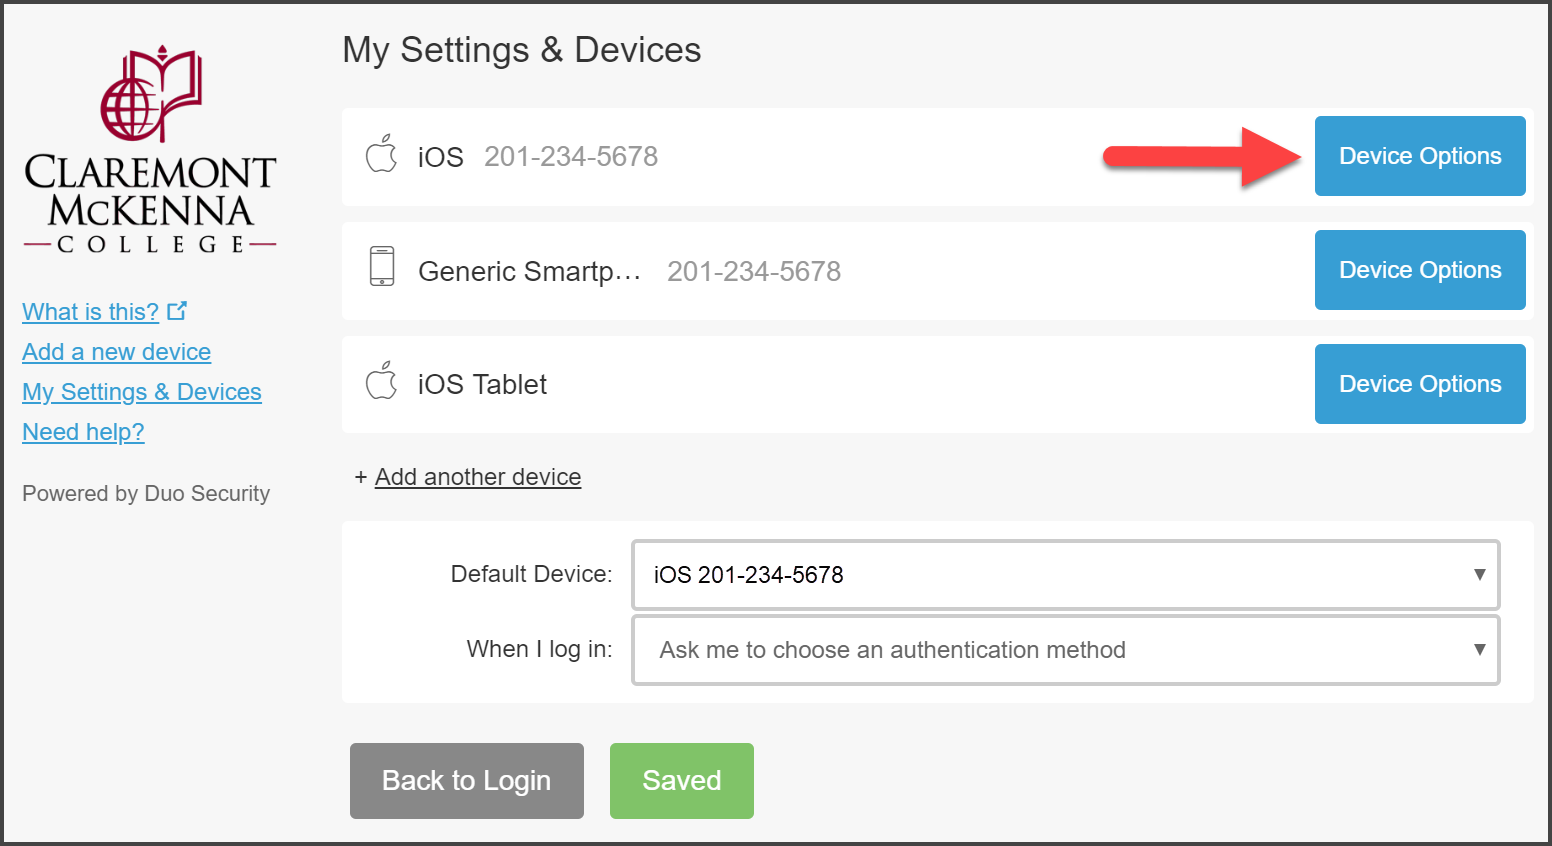 CMC Duo “My Settings & Devices” page with device overview with iOS Mobile phone, Generic Smartphone, and iOS Tablet device added to profile with arrow pointing to Device Options for iOS Mobile phone device